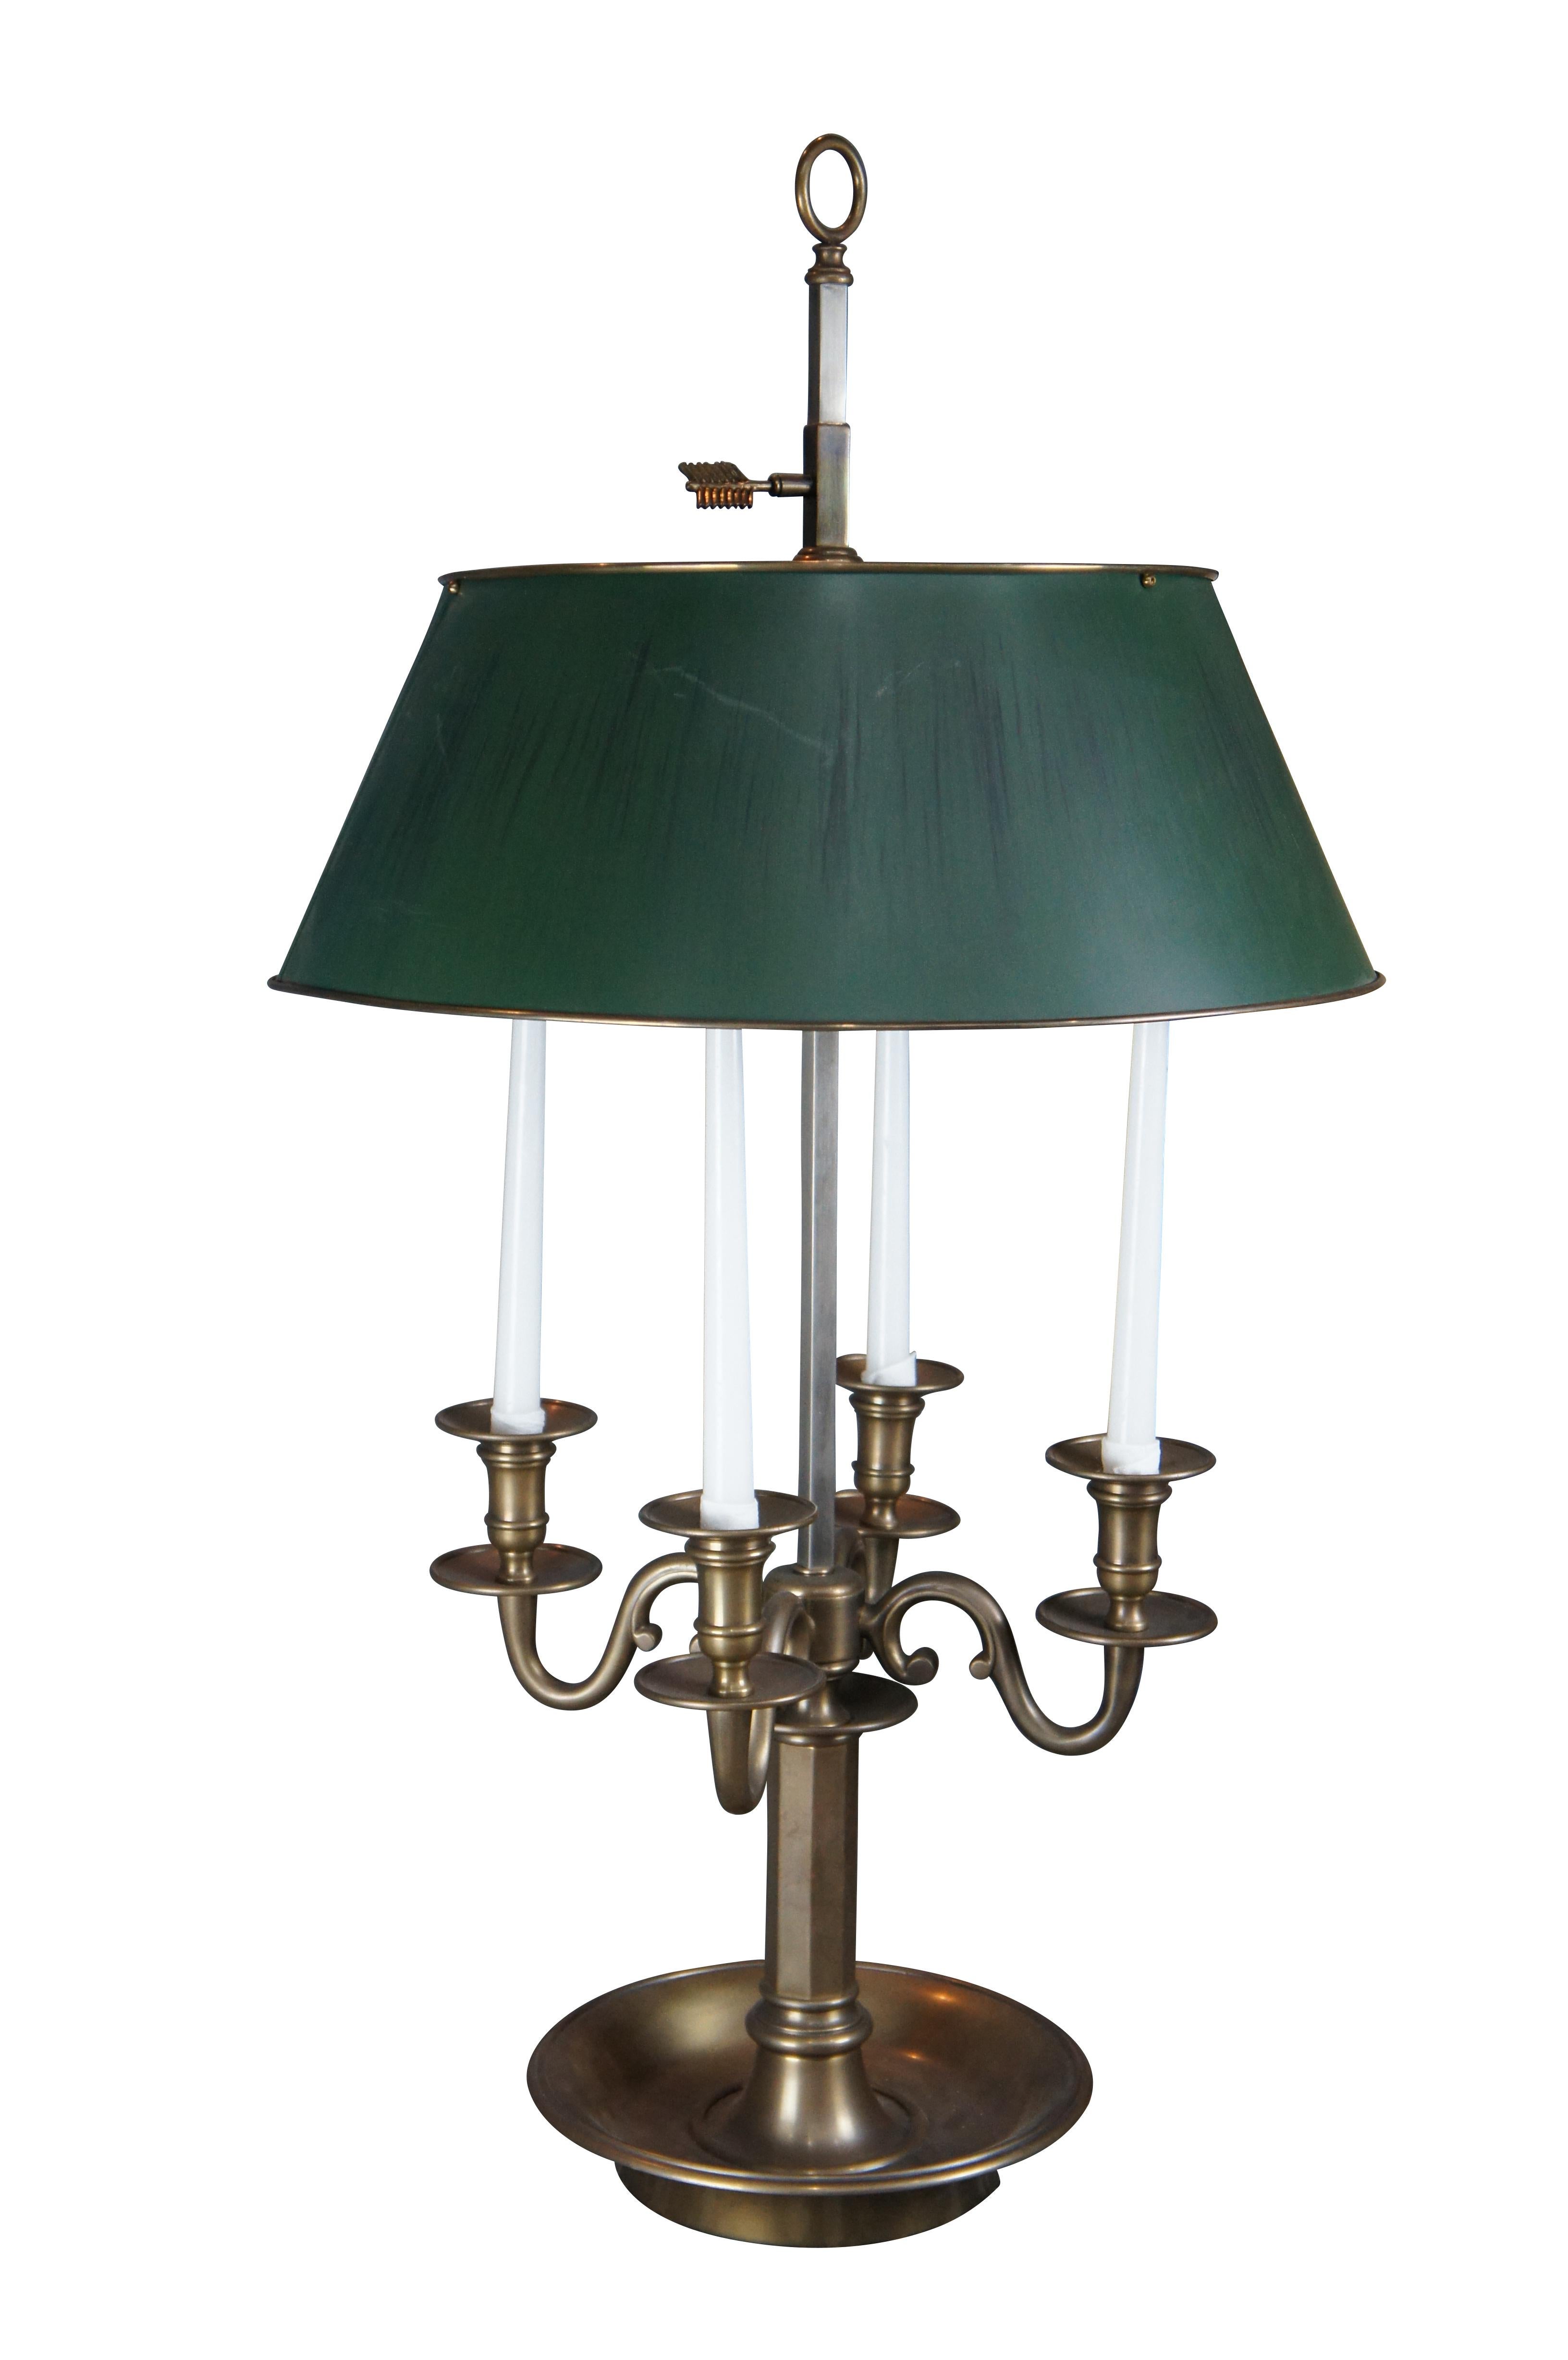 Large and Impressive late 20th century French inspired Bouillotte lamp by Visual Comfort. Features a four arm candelabra over hexagonal support and circular base. The lamp features a square shaped column with adjustable brass tole shade finished in